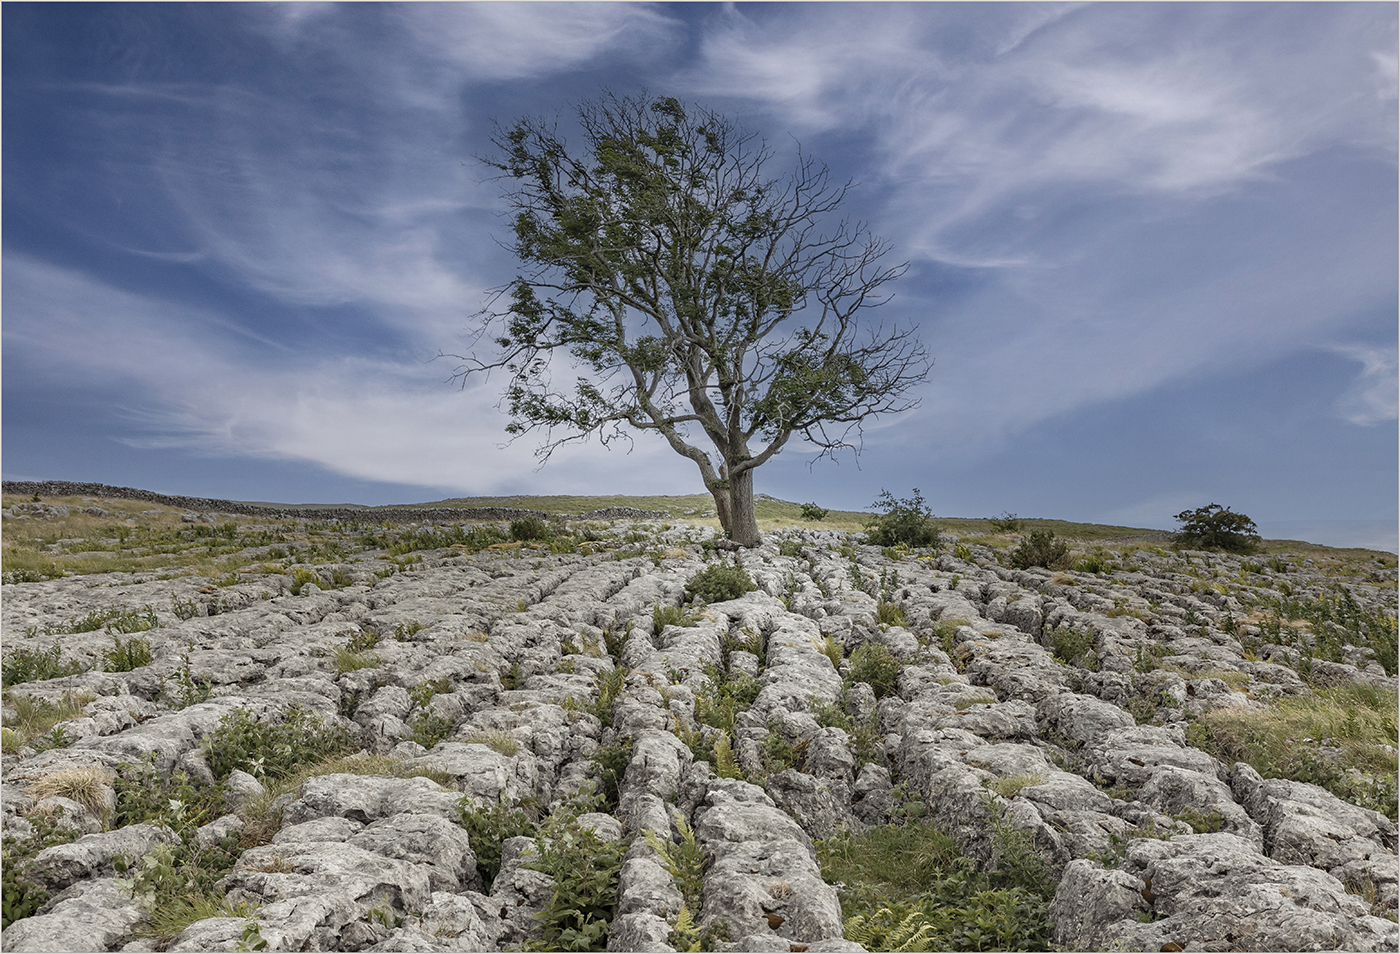 Lone tree on a limestone pavement by Colleen Ashley